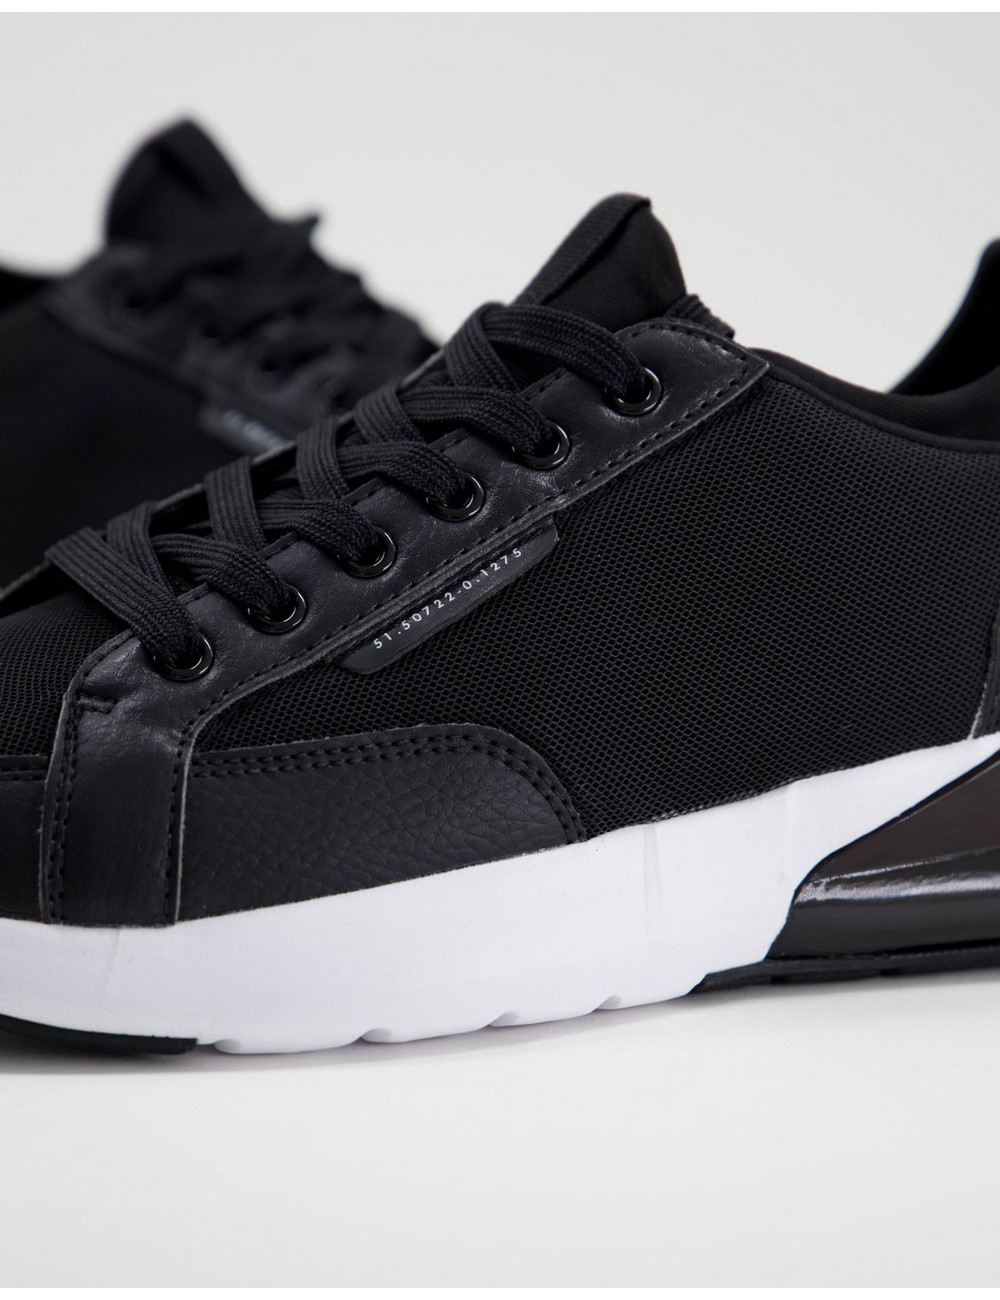 River Island trainers in black